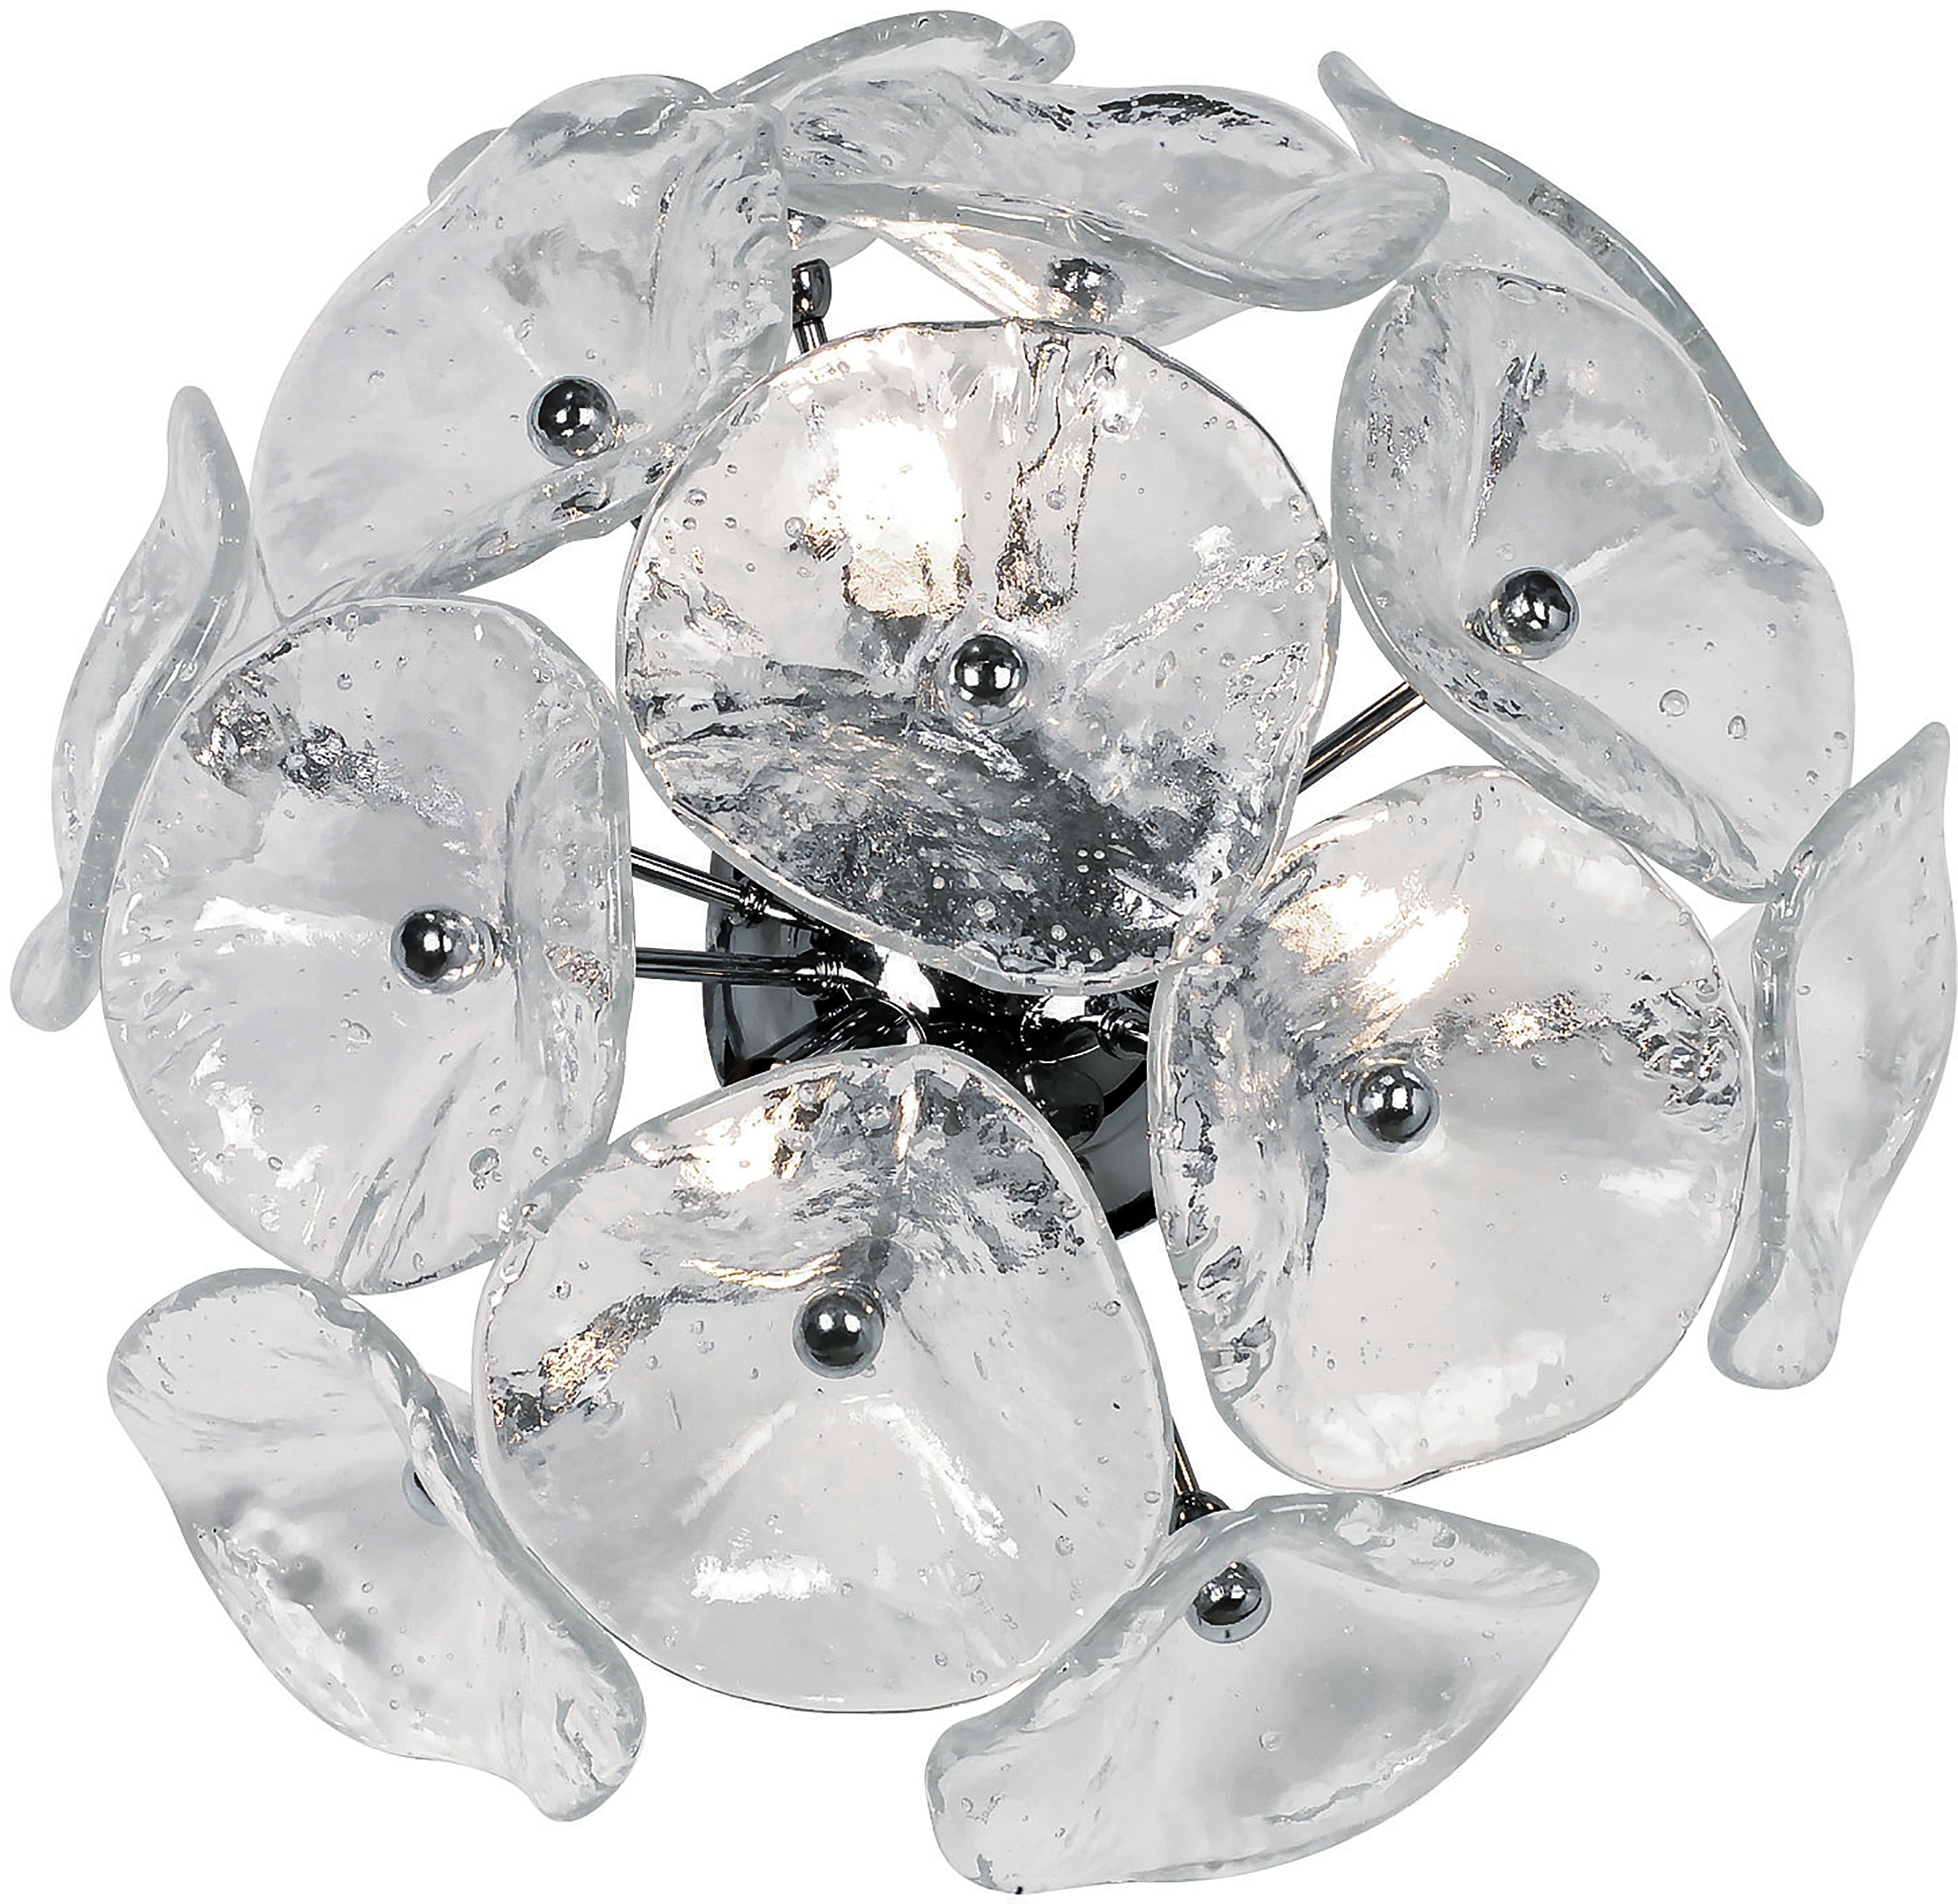 Fiori-Wall Sconce Wall Light Fixtures ET2 0x14.25x7.5 Polished Chrome 